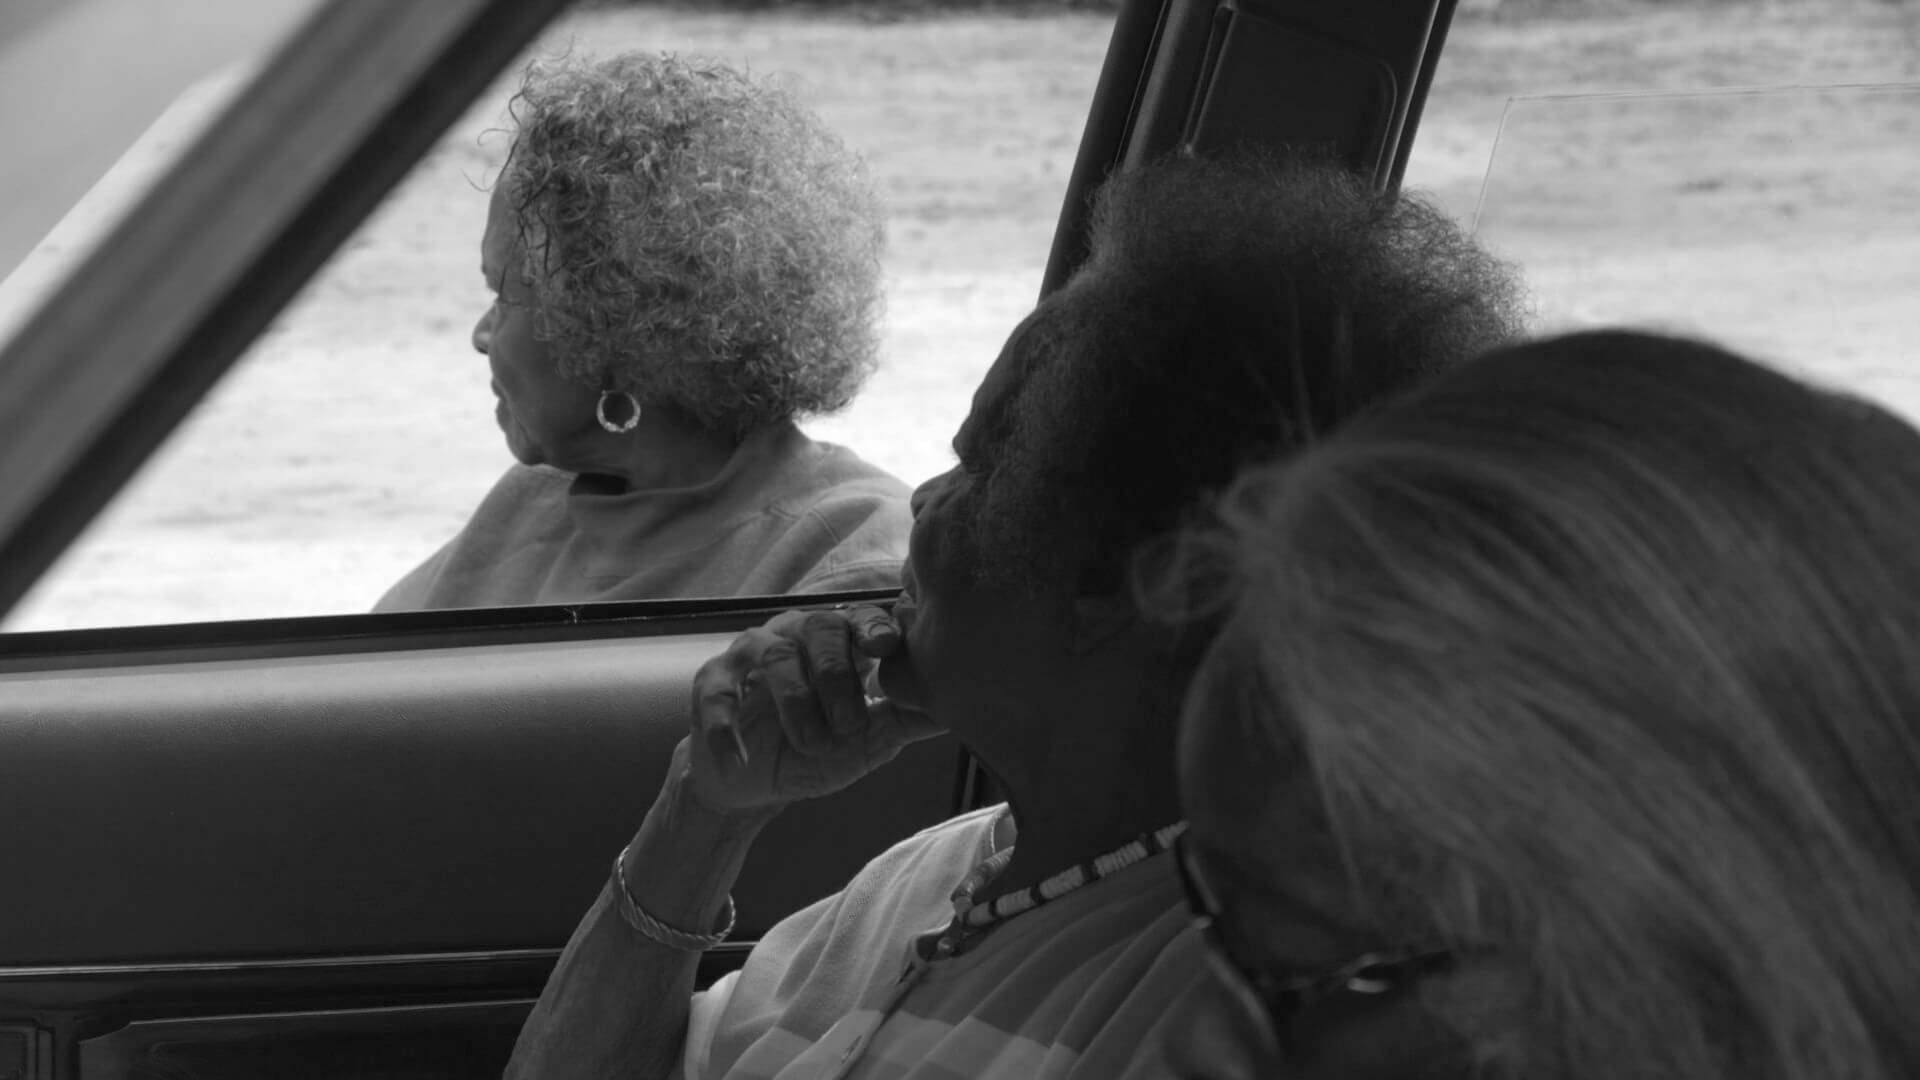 Still from Seeds. Two elderly women are sitting inside of a car, another elderly woman is outside the window. All of them look away from the camera. Black and white shot.